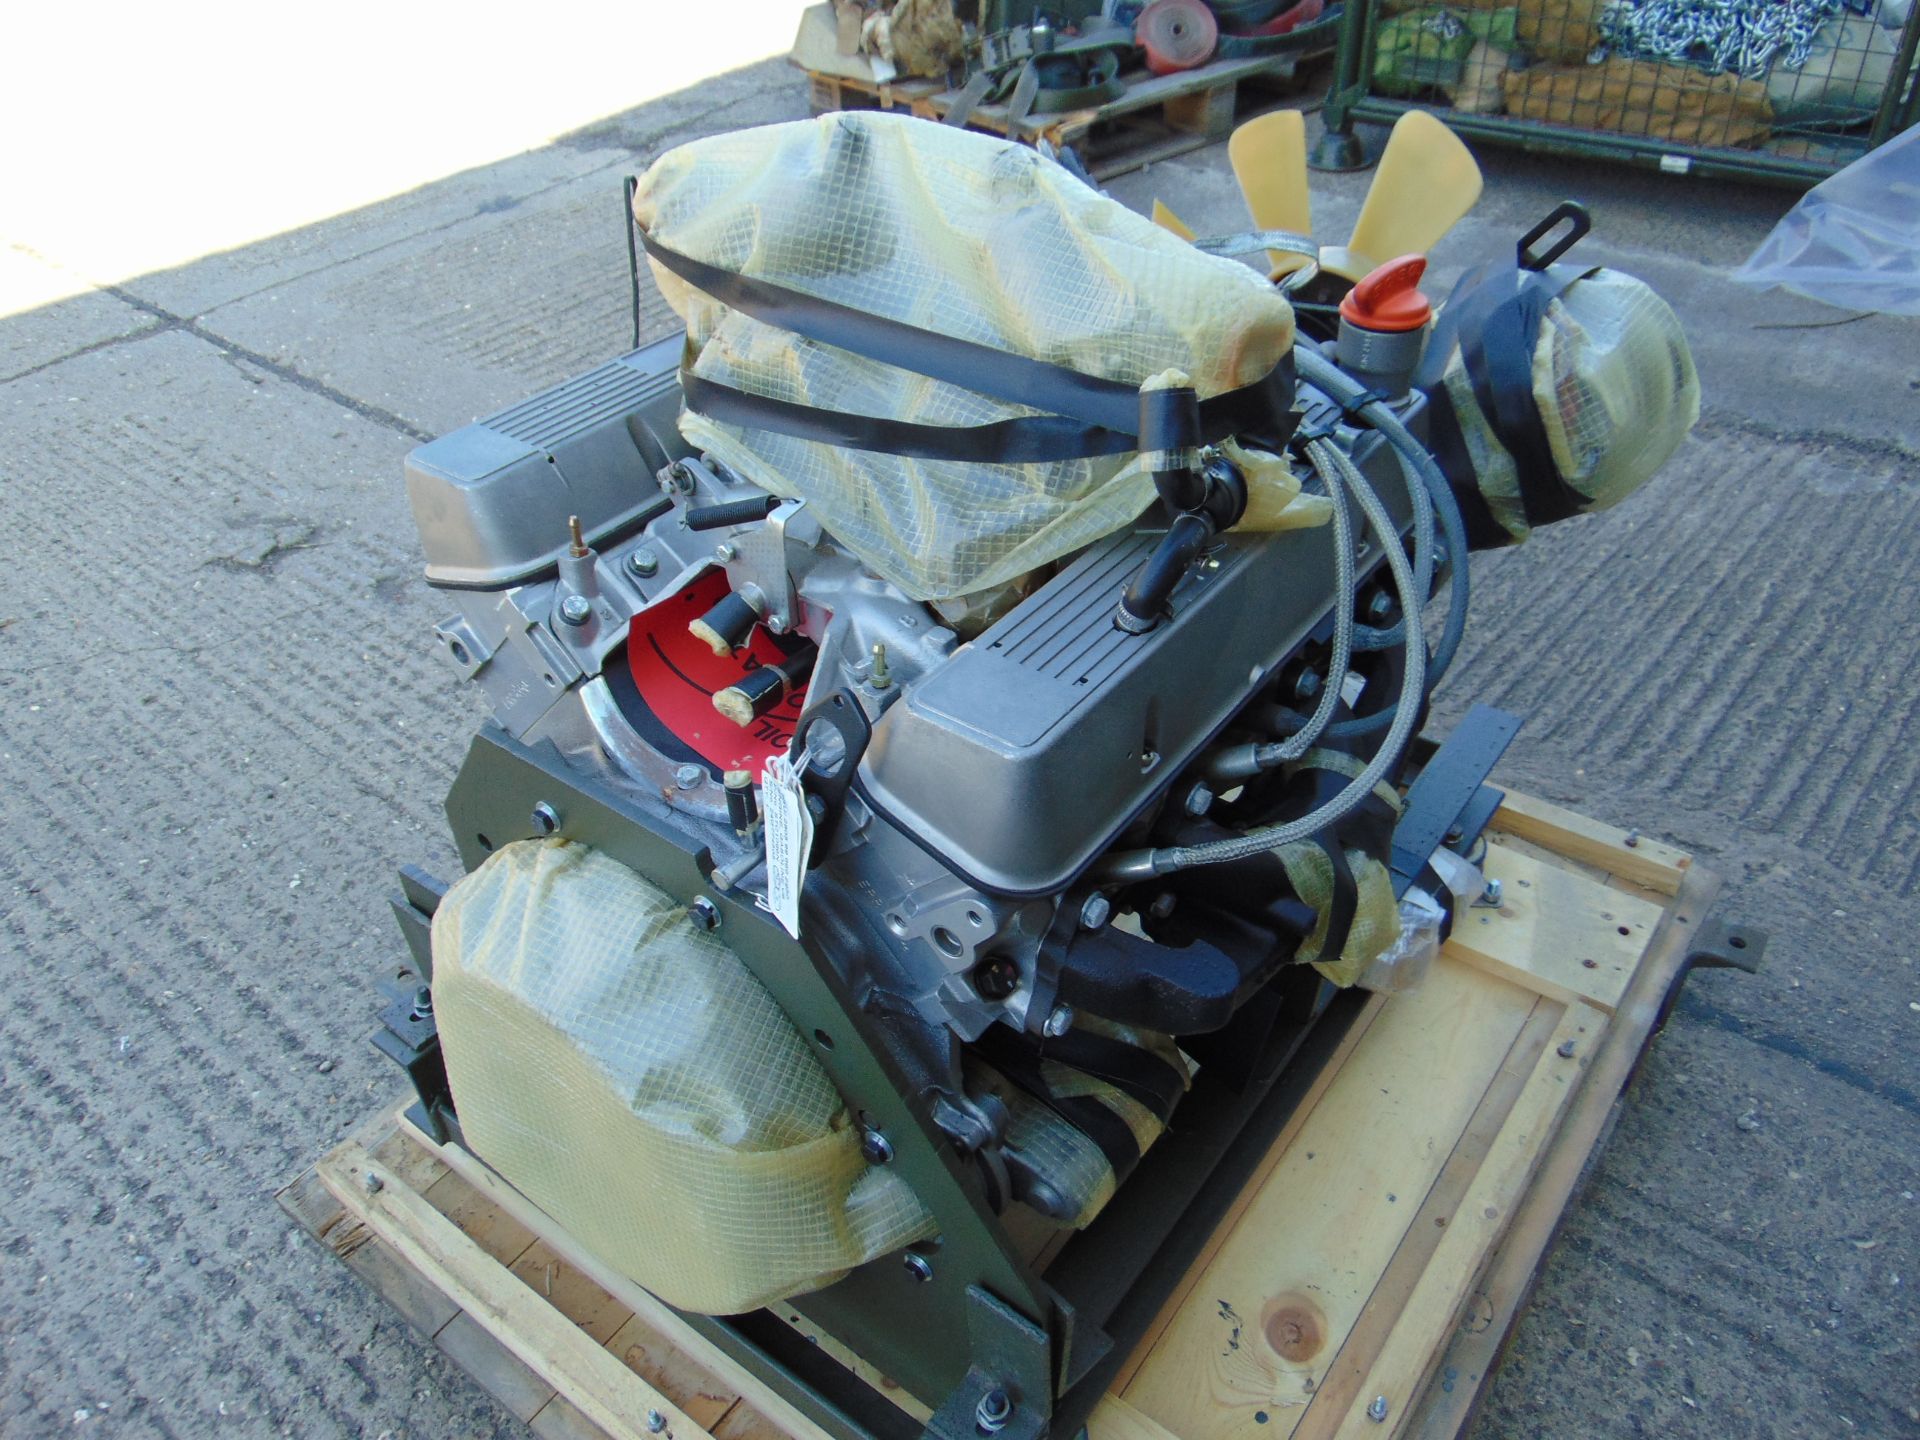 Fully Reconditioned Land Rover V8 Engine c/w all Accessories, as shown in Crate etc - Image 6 of 21